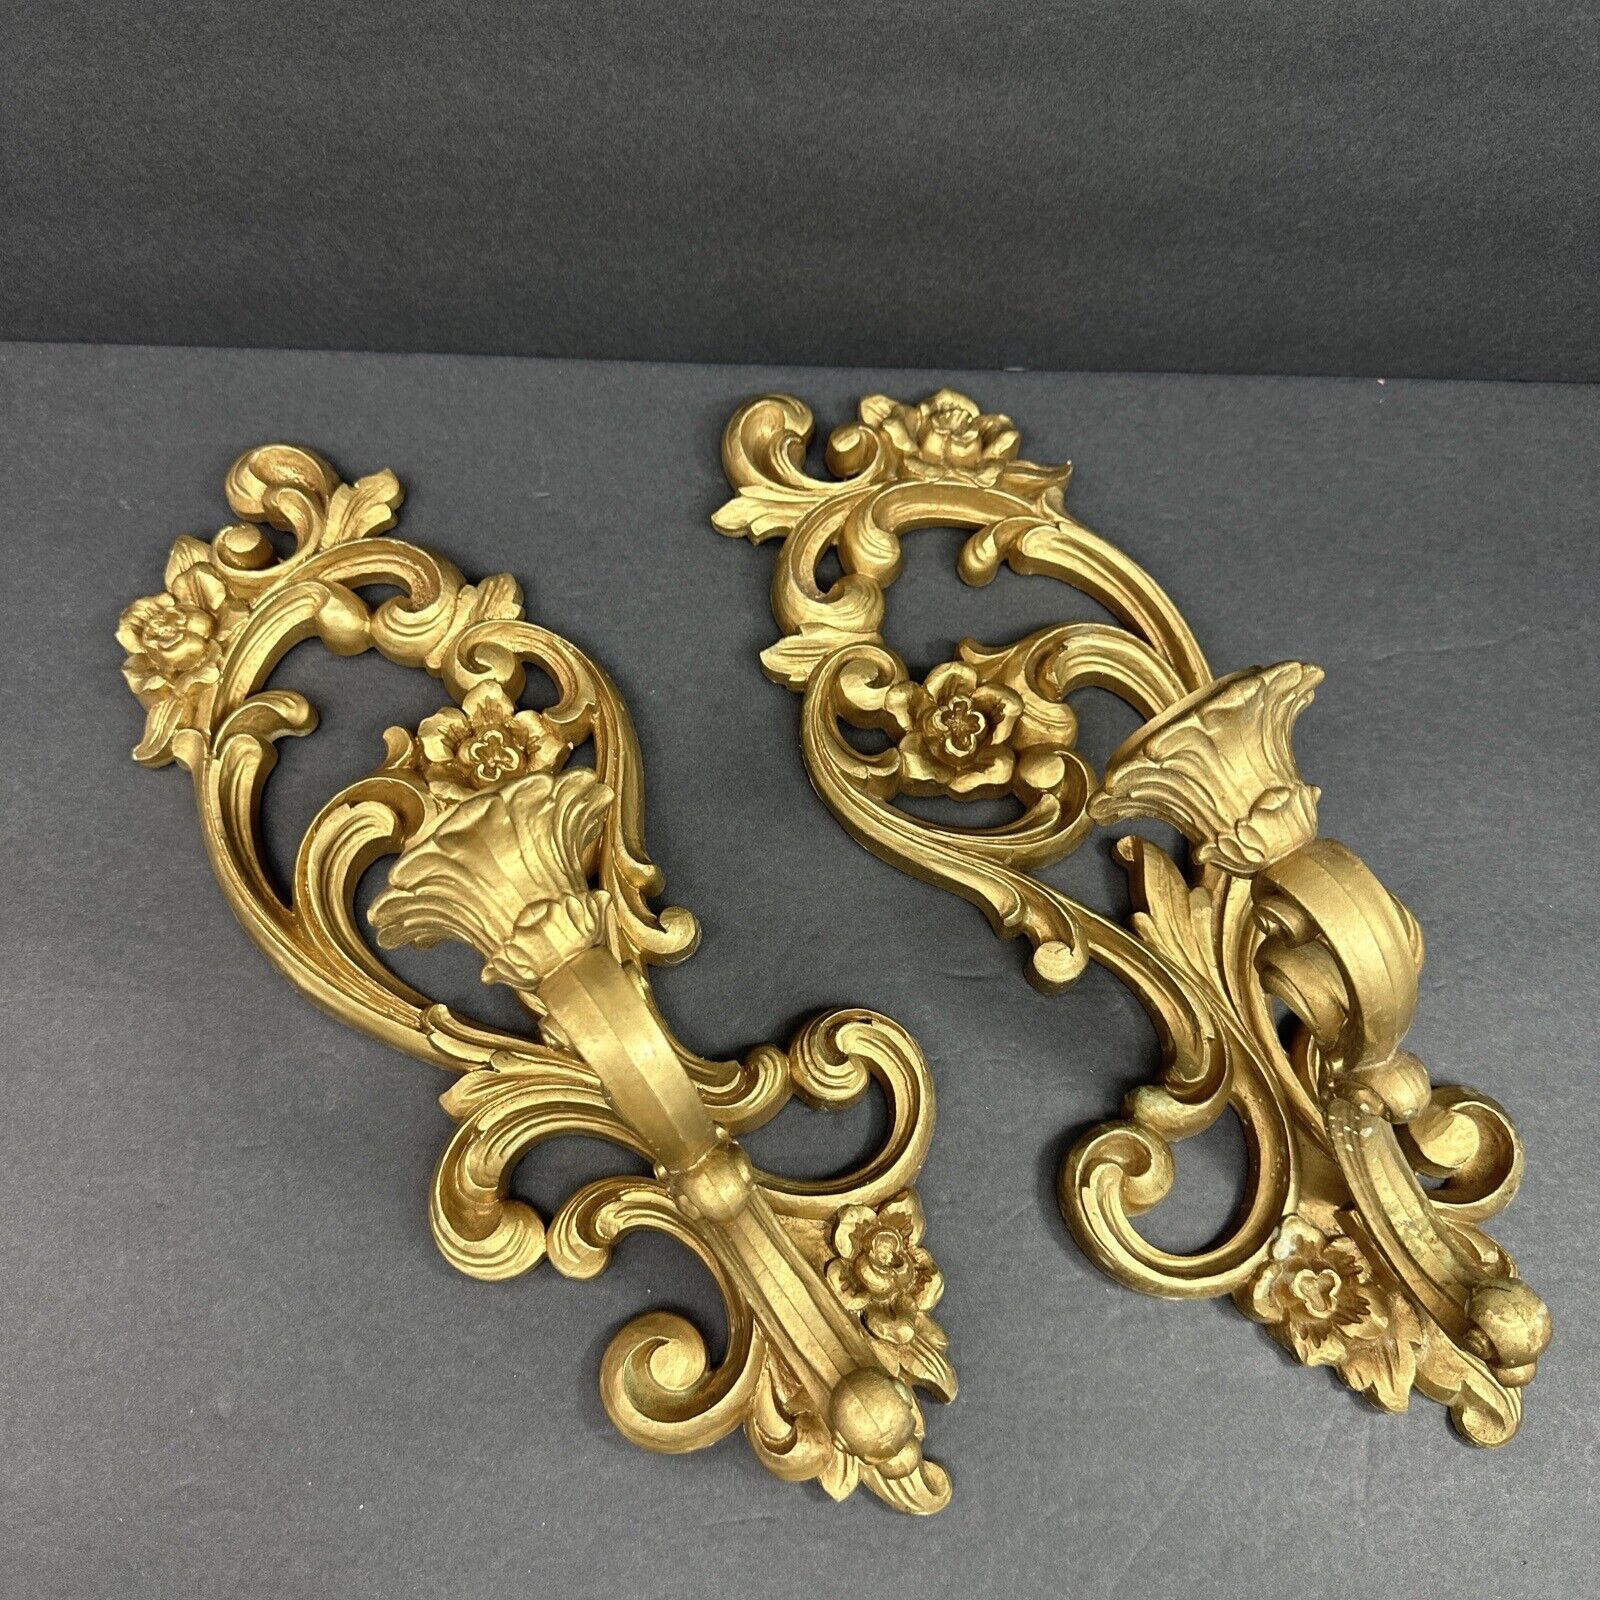 SCONCE Set Vintage Syroco Homco Gold Toned Candle Holder Wall #4118 USA READ